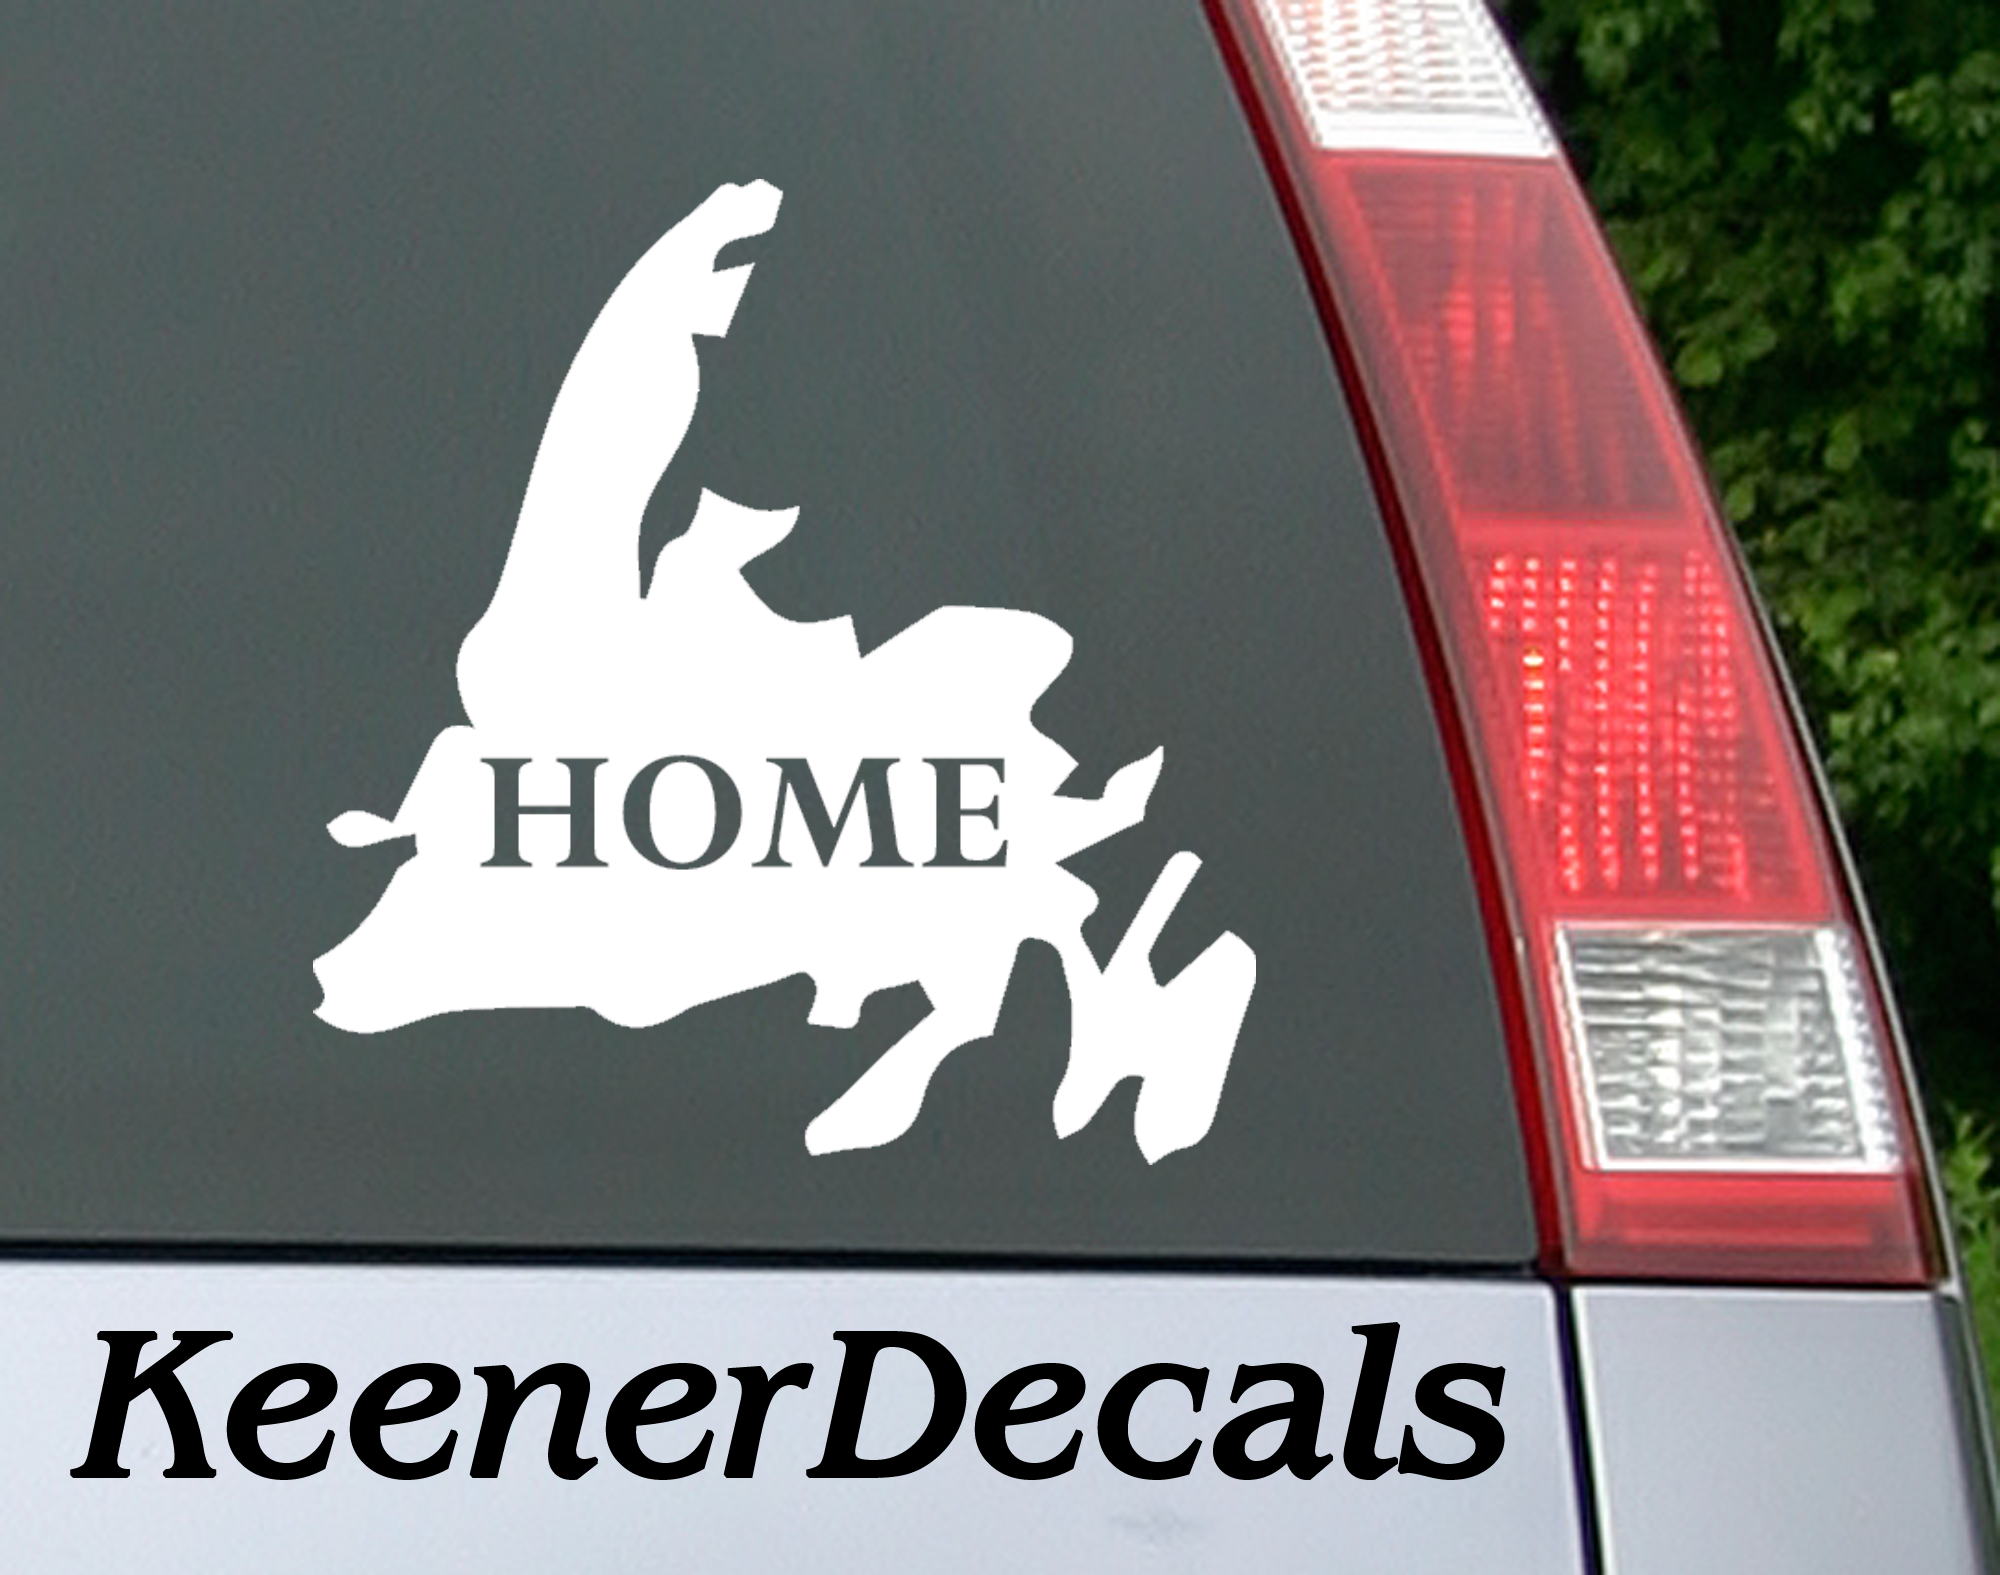 HOME - Newfoundland Vinyl Car Decal Bumper Sticker. From the Rock? You need this vinyl.  5"W x 5"H Funny Car Decal, Car Sticker, Car Vinyl, Bumper Sticker, Vinyl Stickers, Vinyl Sticker.  FREE SHIPPING FOR ALL VINYL DECALS within Canada and the US.